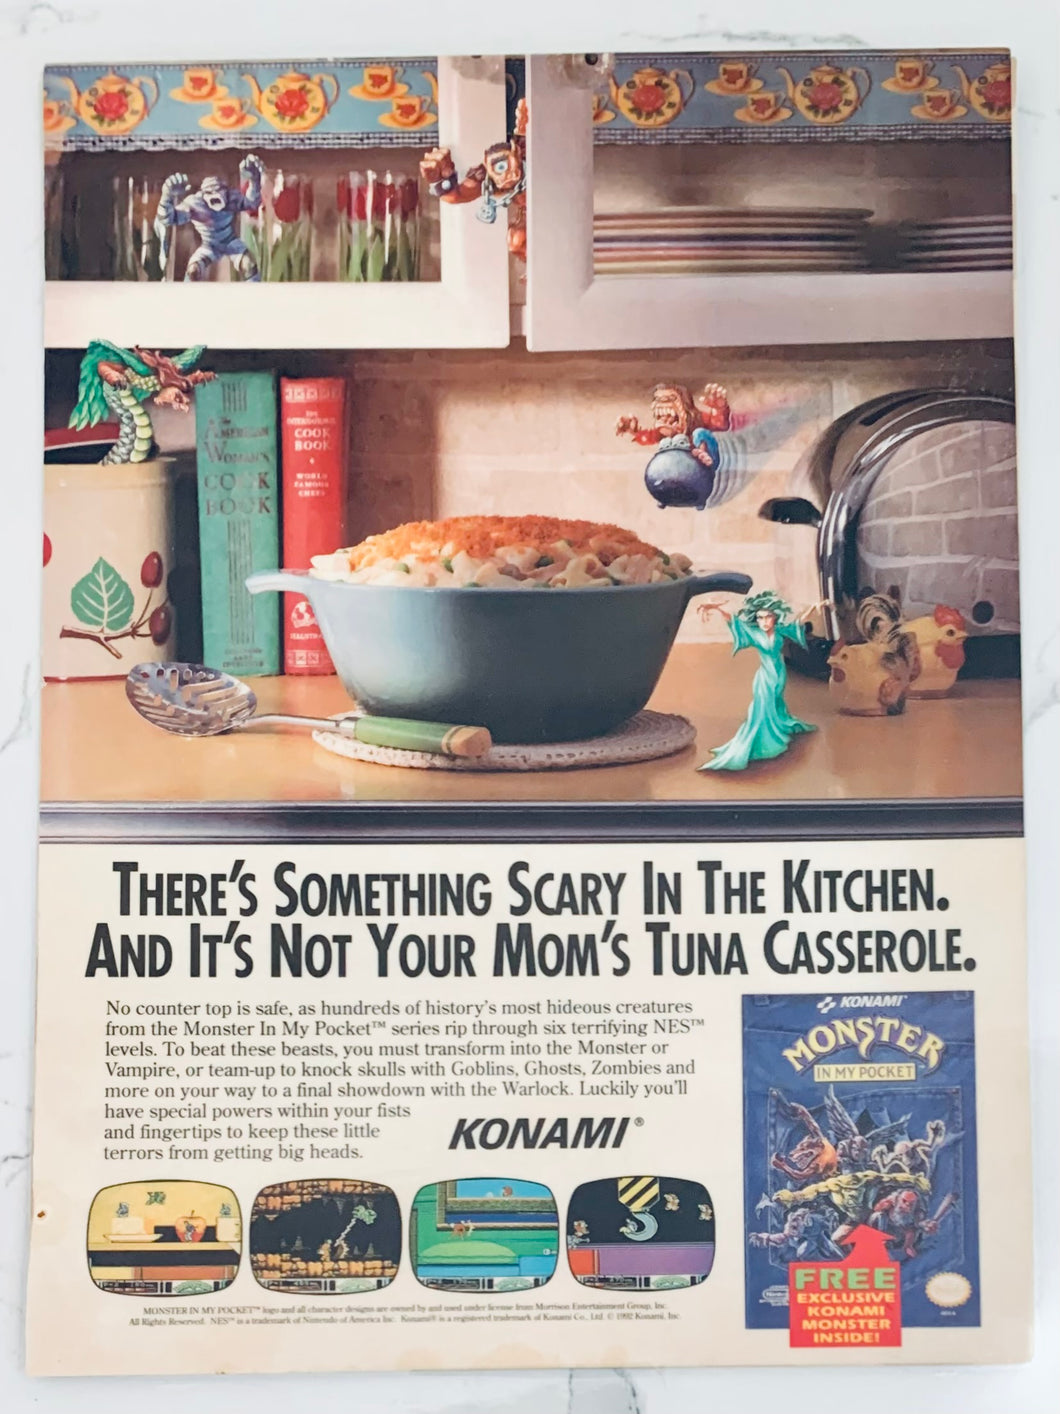 Monster in My Pocket - NES - Original Vintage Advertisement - Print Ads - Laminated A4 Poster